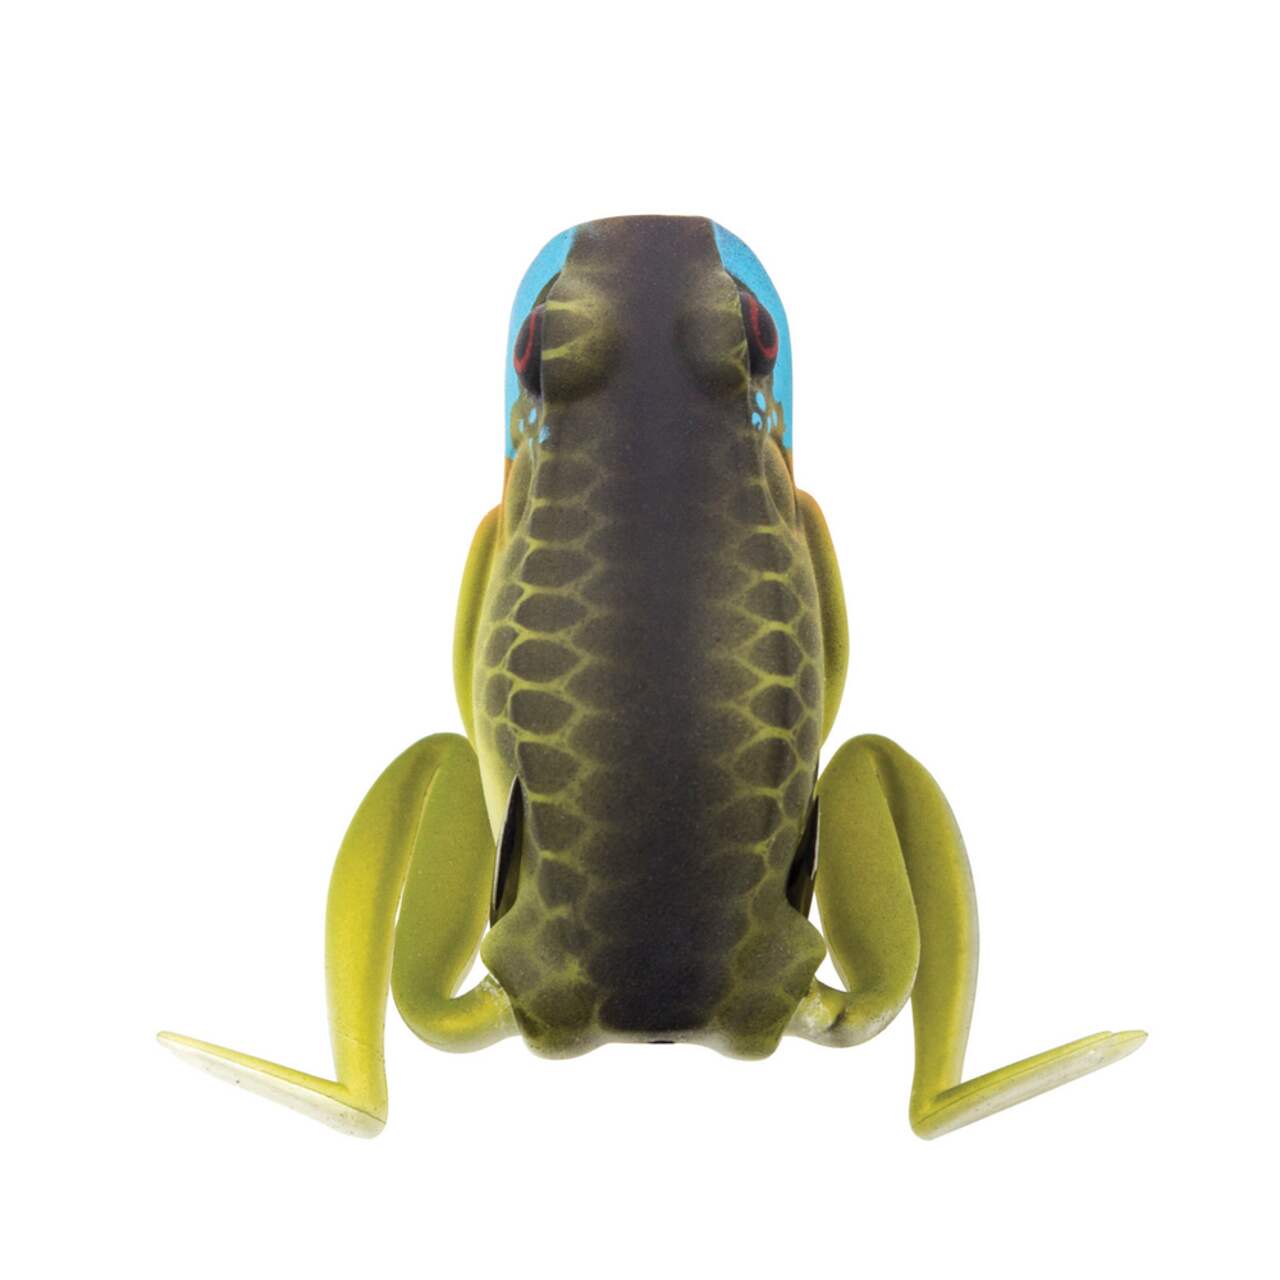 https://media-www.canadiantire.ca/product/playing/fishing/fishing-lures/0777700/lunkerhunt-popping-frog-blue-gill-1-4oz-3c10666b-5dcc-4987-8cca-94c1bf8b8022.png?imdensity=1&imwidth=640&impolicy=mZoom